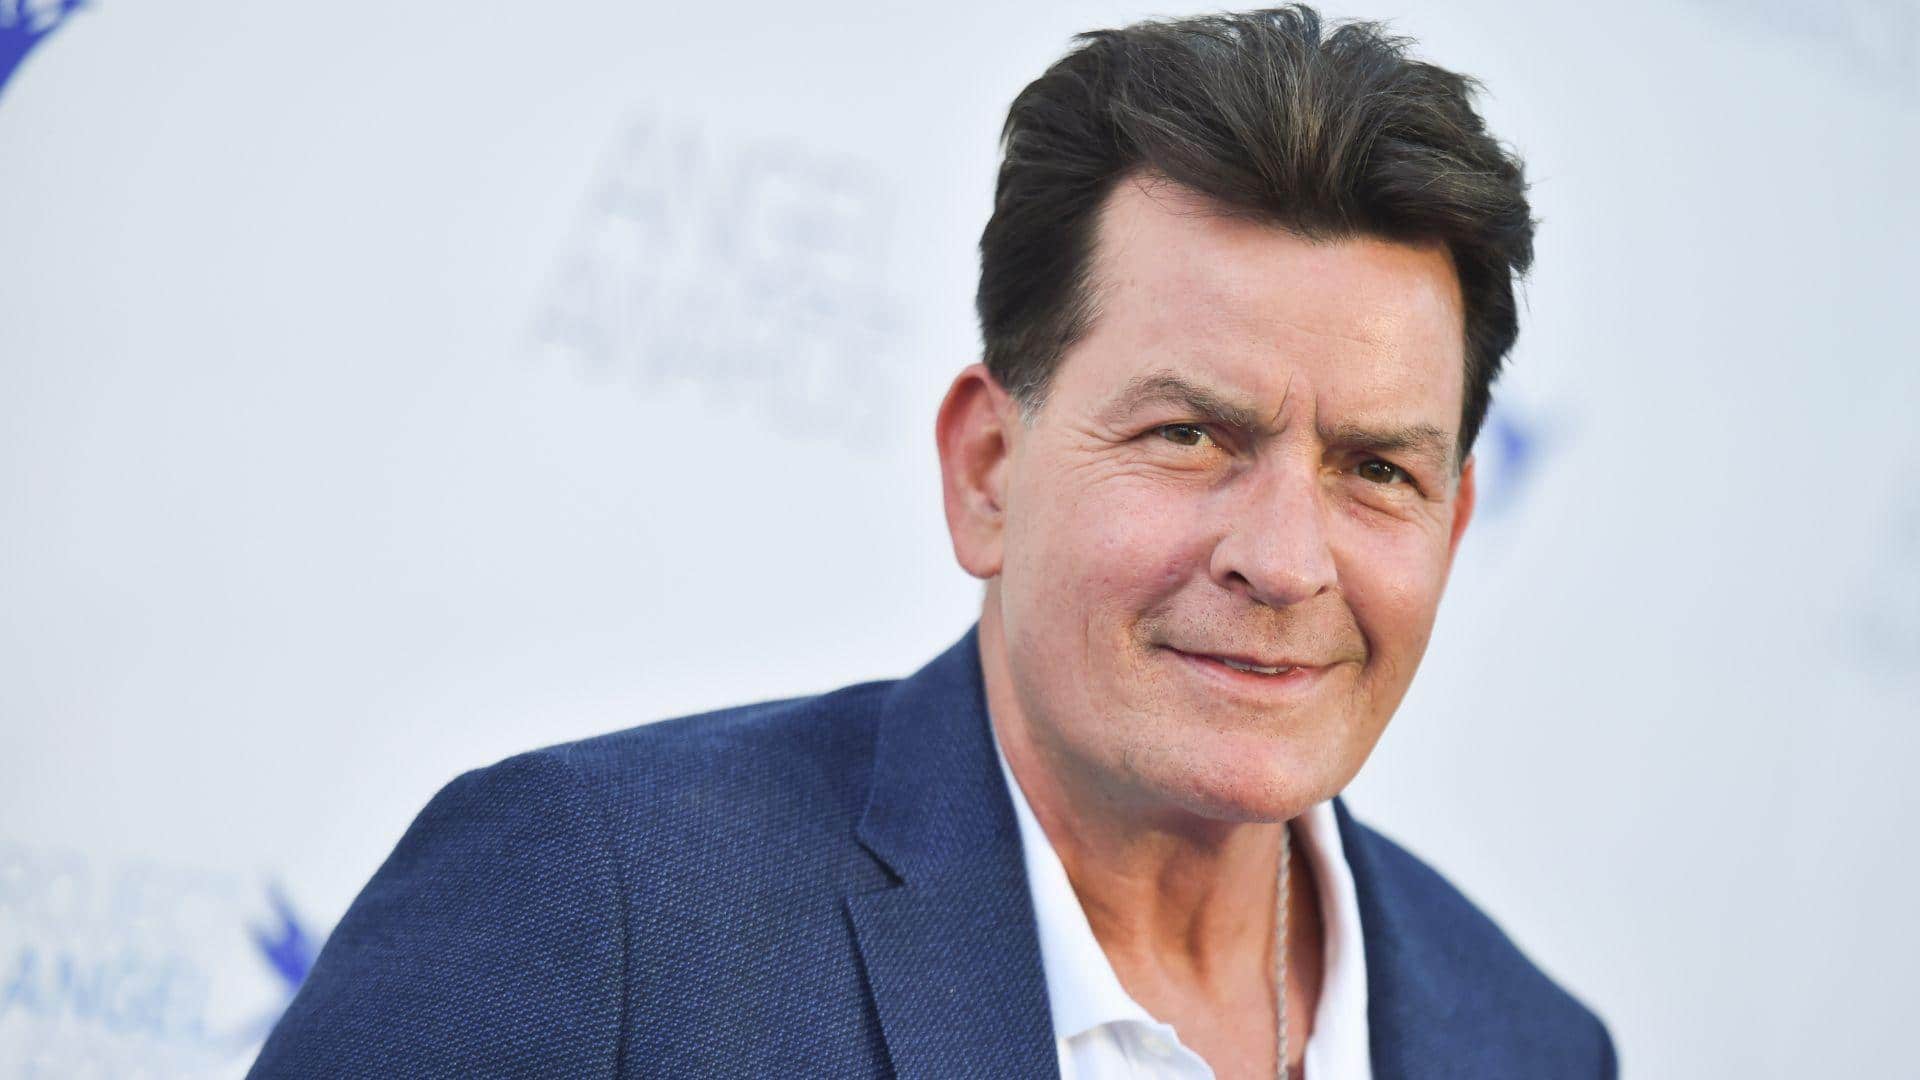 Charlie Sheen assaulted, strangled by neighbor at Malibu residence: Report